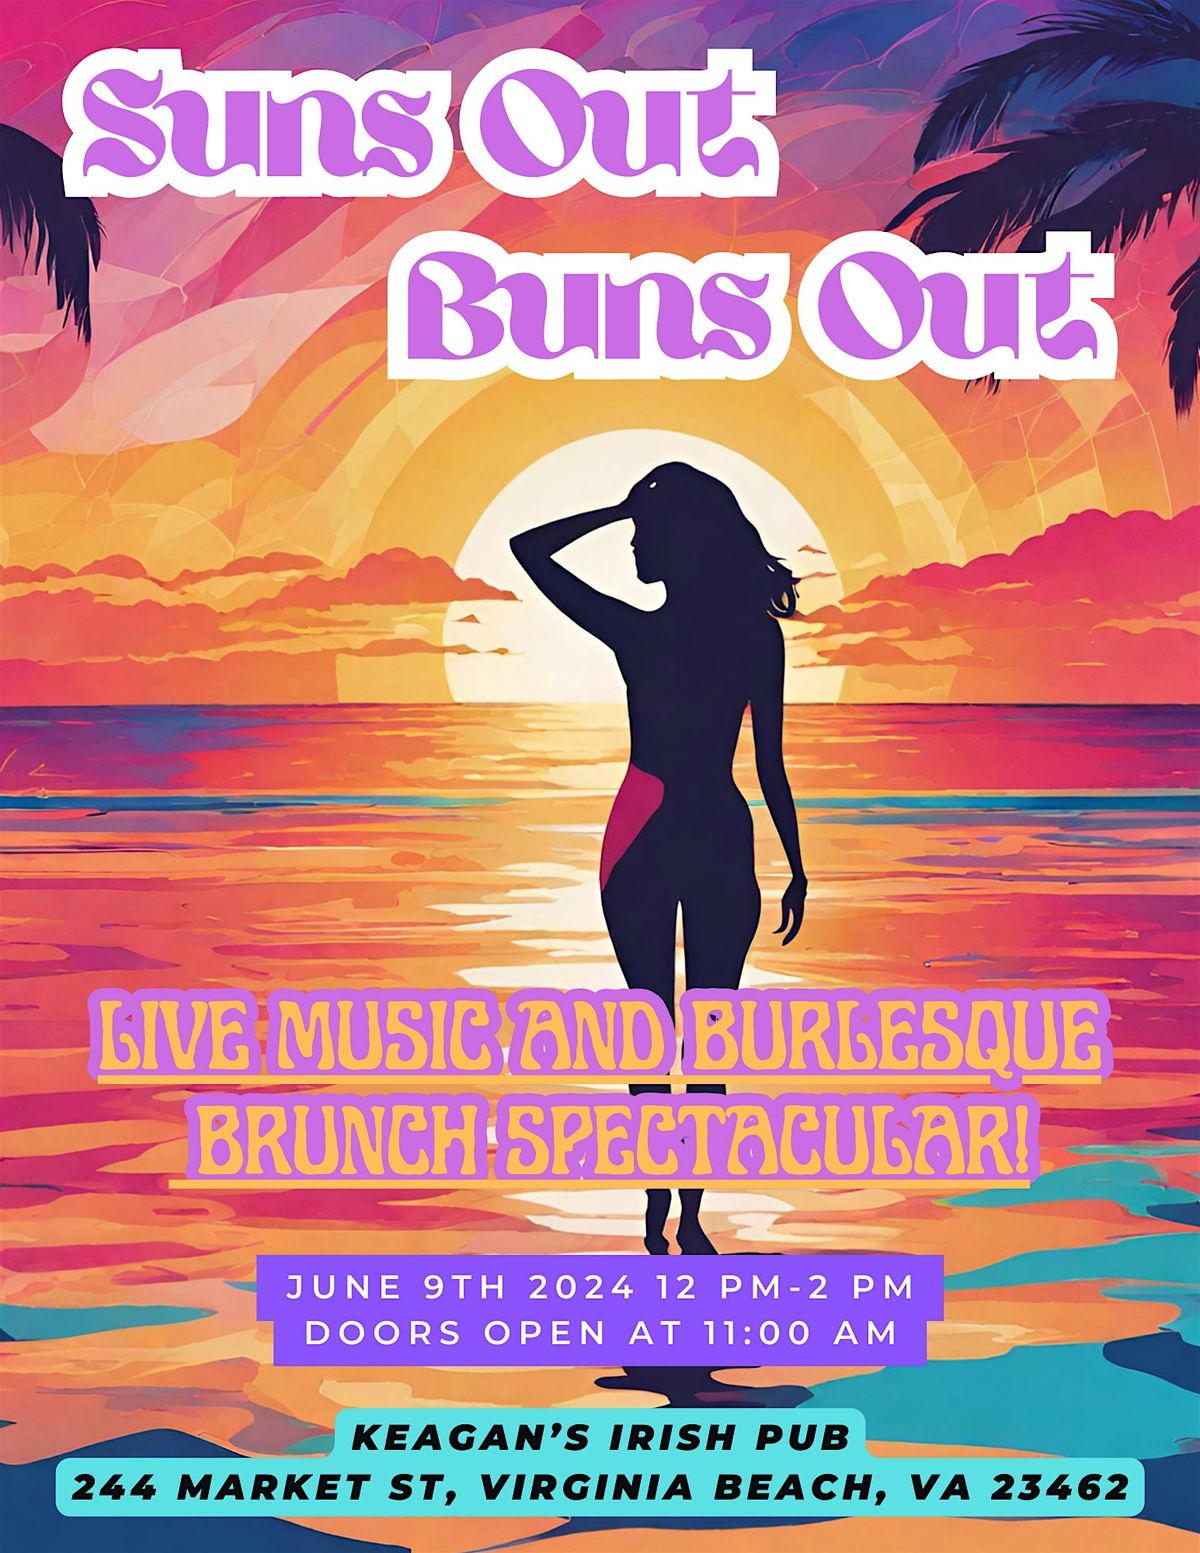 Suns Out Buns Out: Live Music and Burlesque Brunch Spectacular!